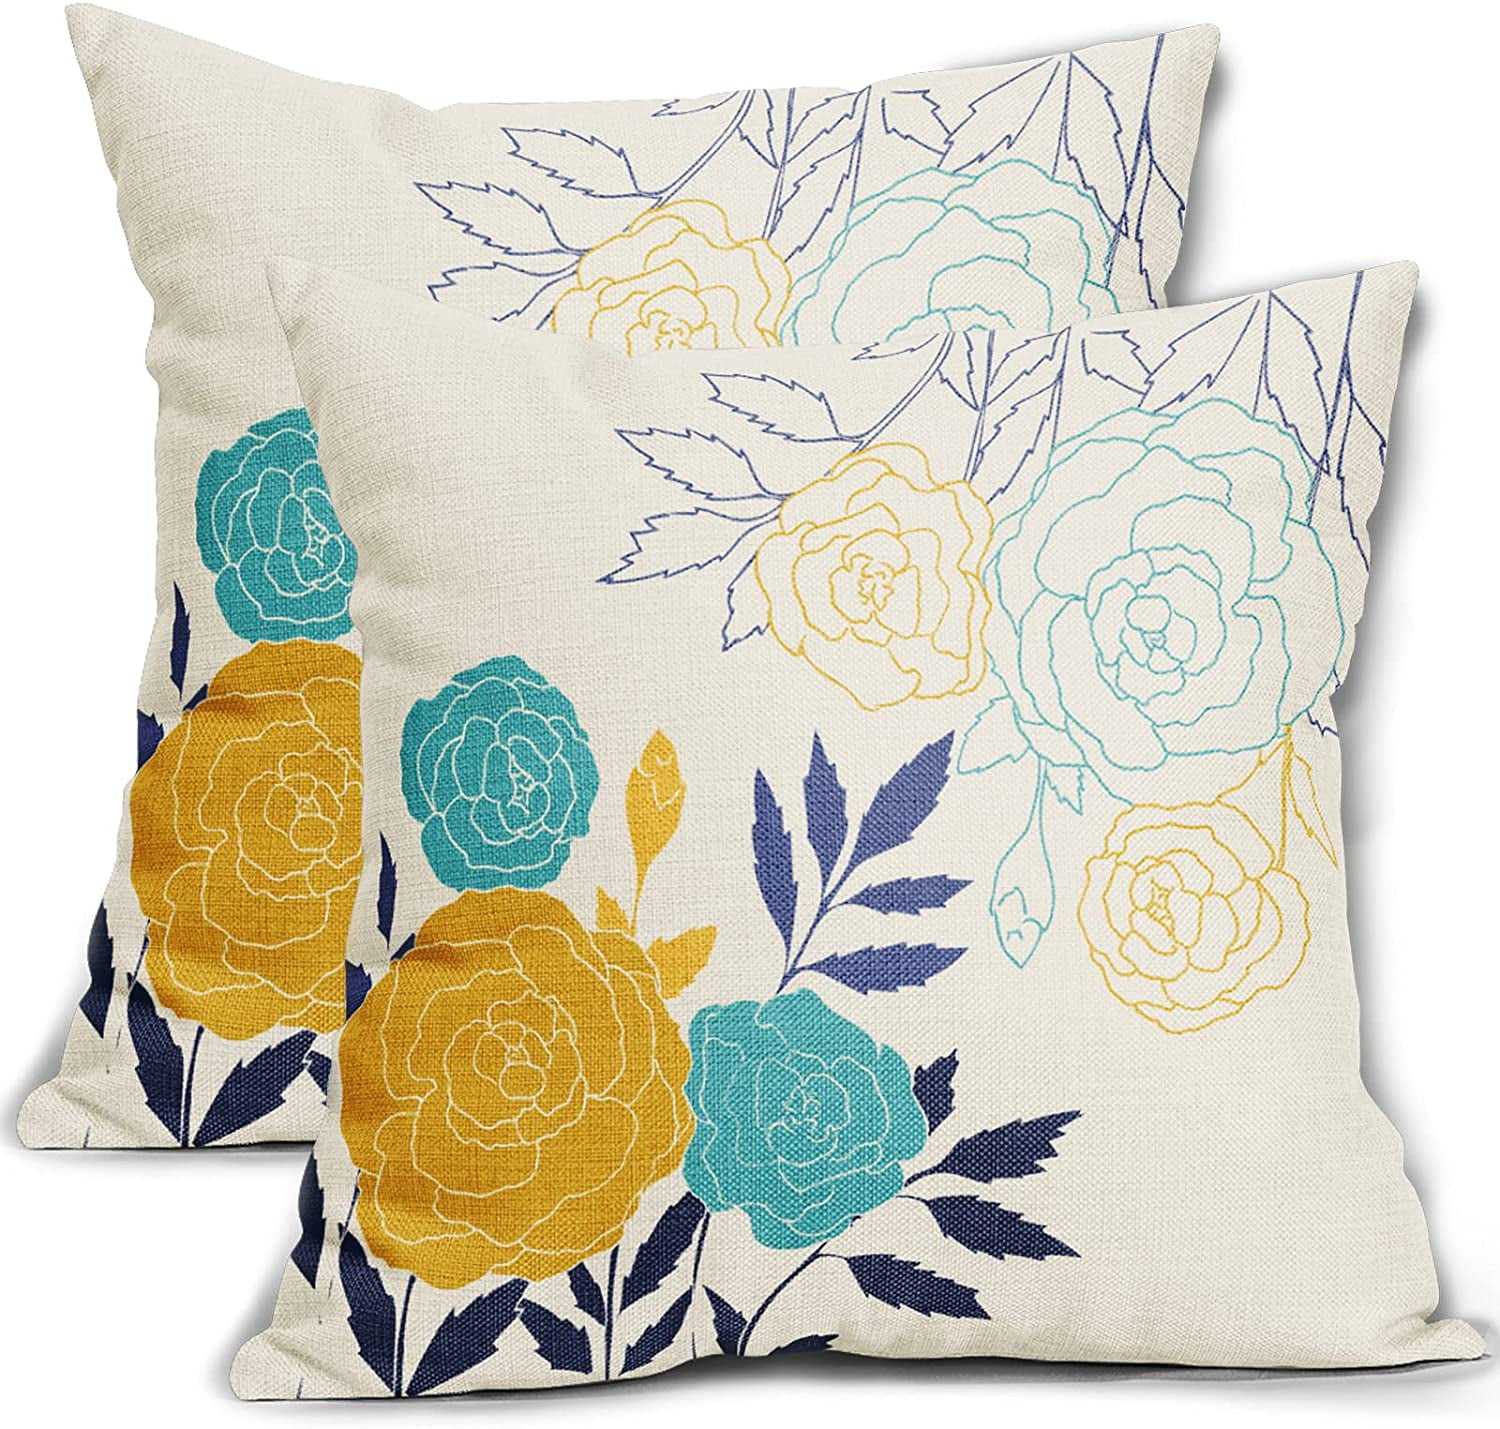 PACK of 2 Throw Pillow Covers Case 18x18 Inches Blue Flower 